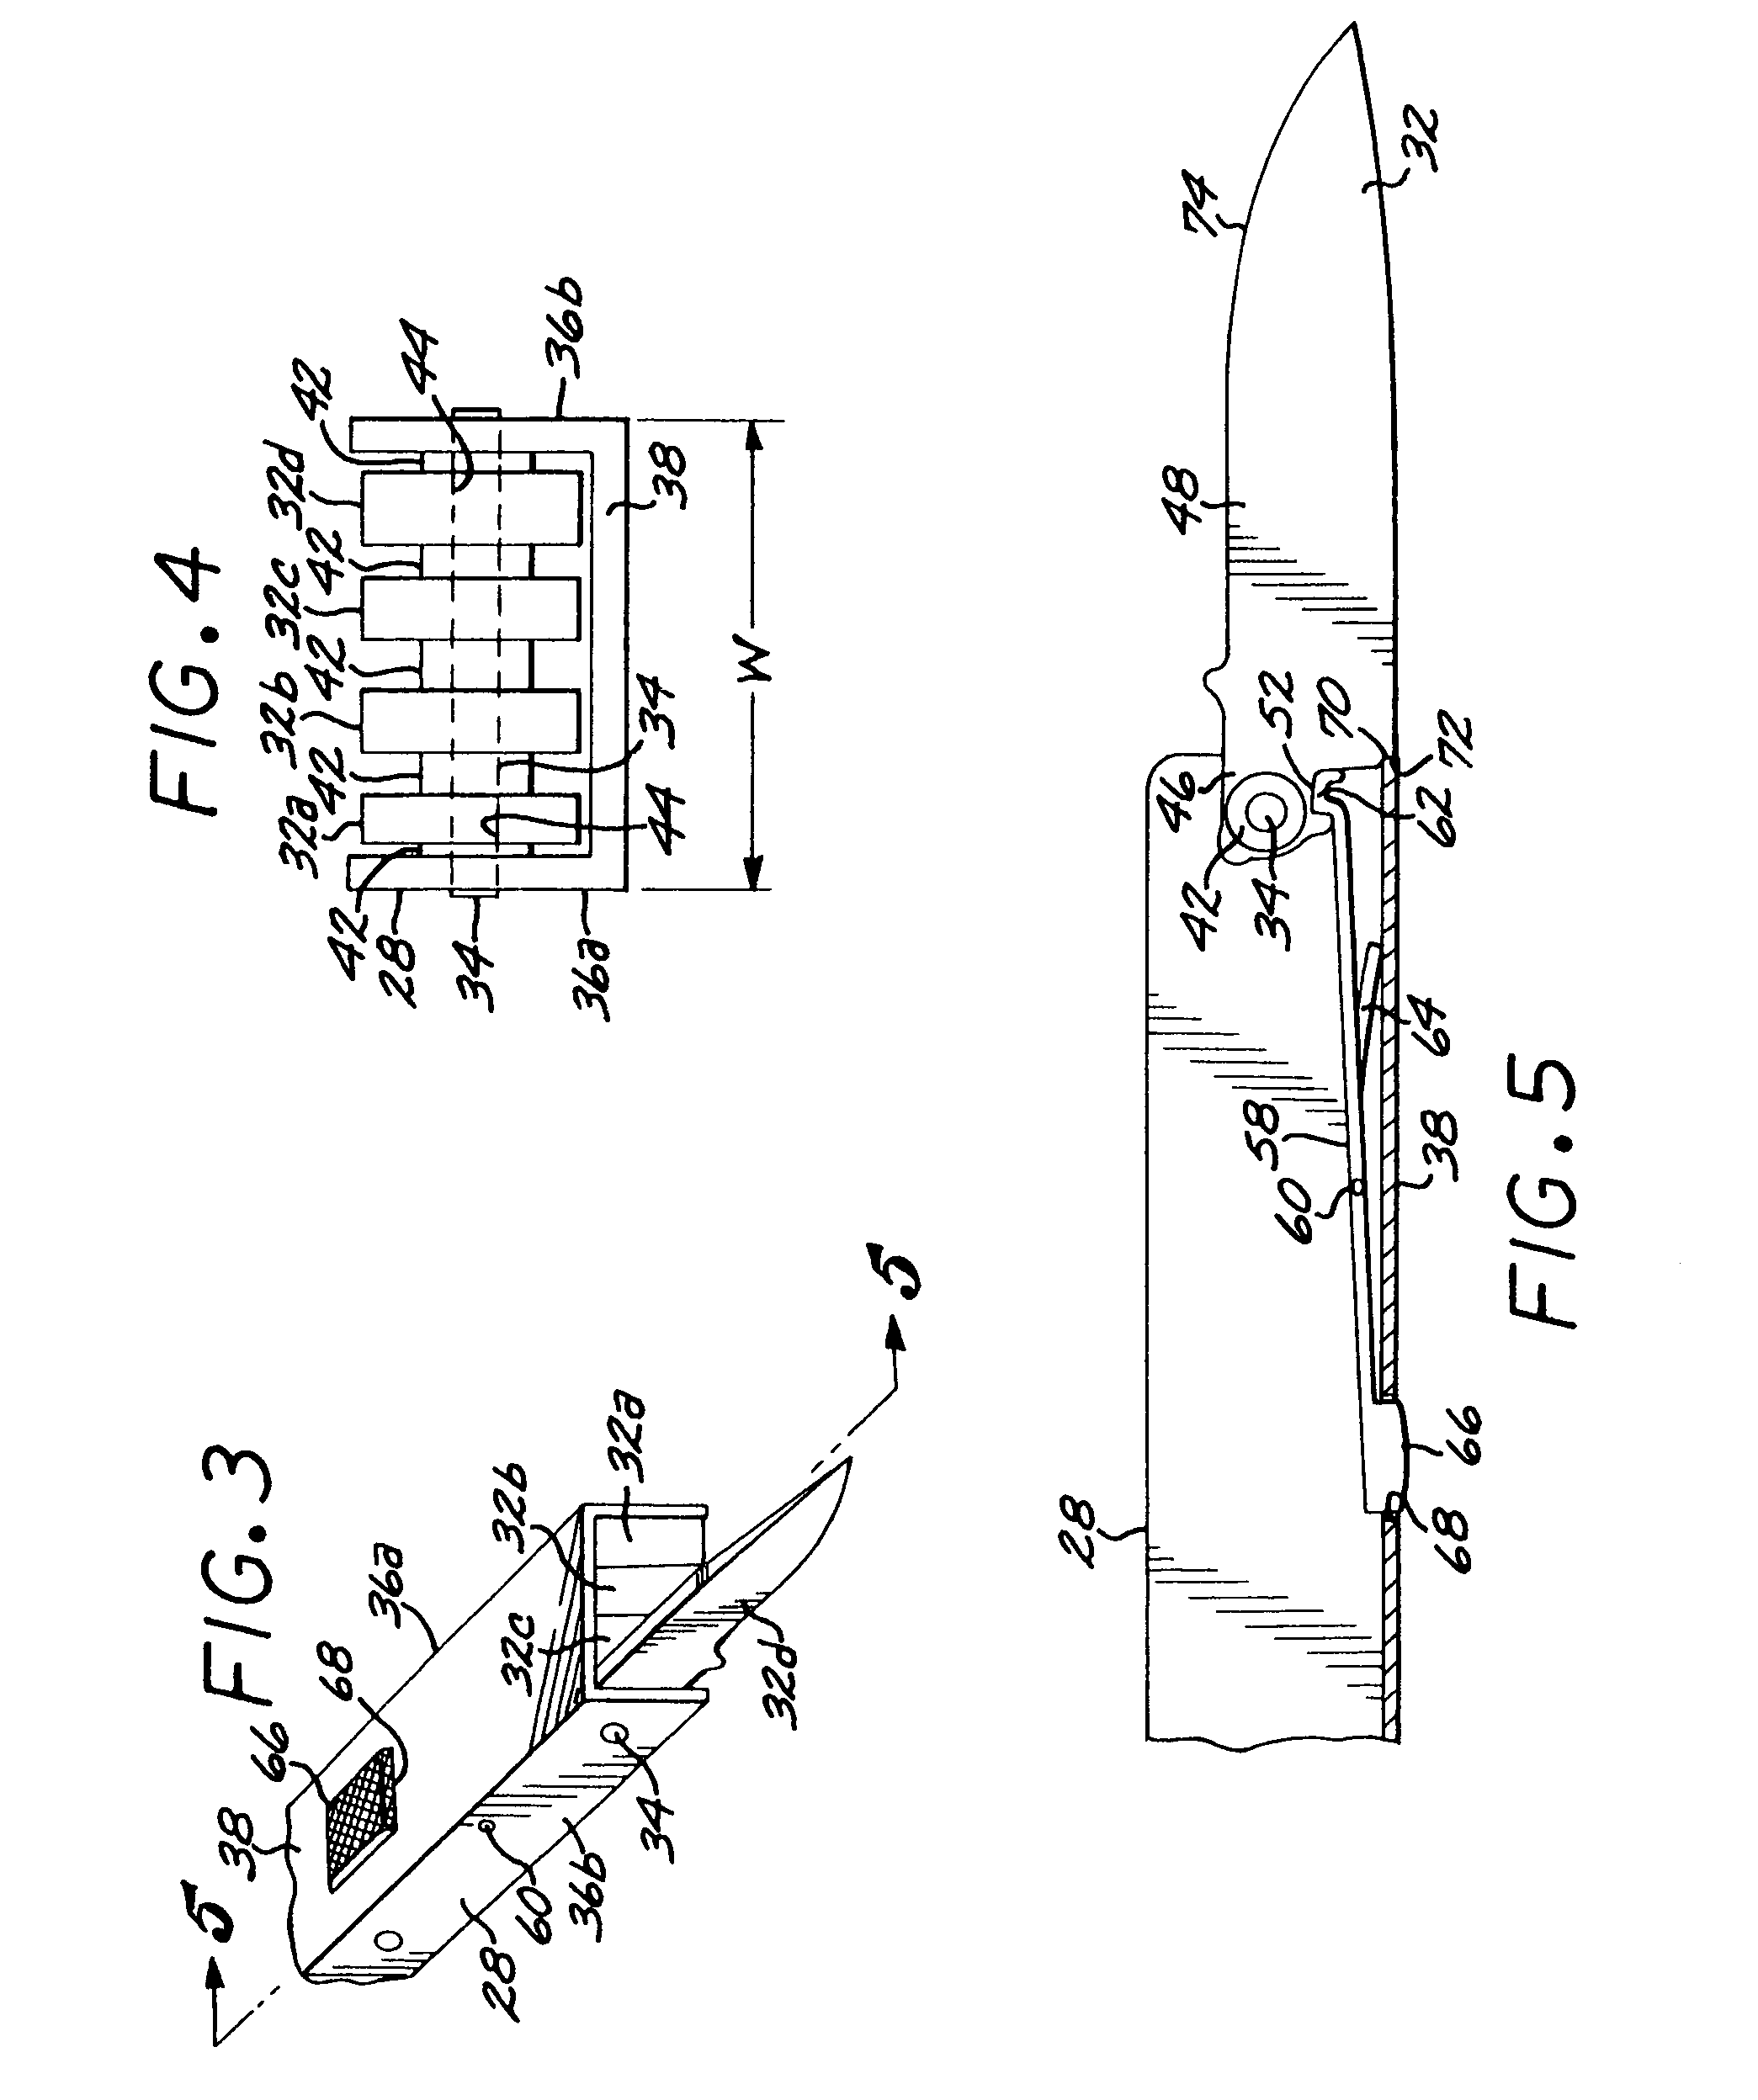 Hand tool with multiple locking blades controlled by a single locking mechanism and release